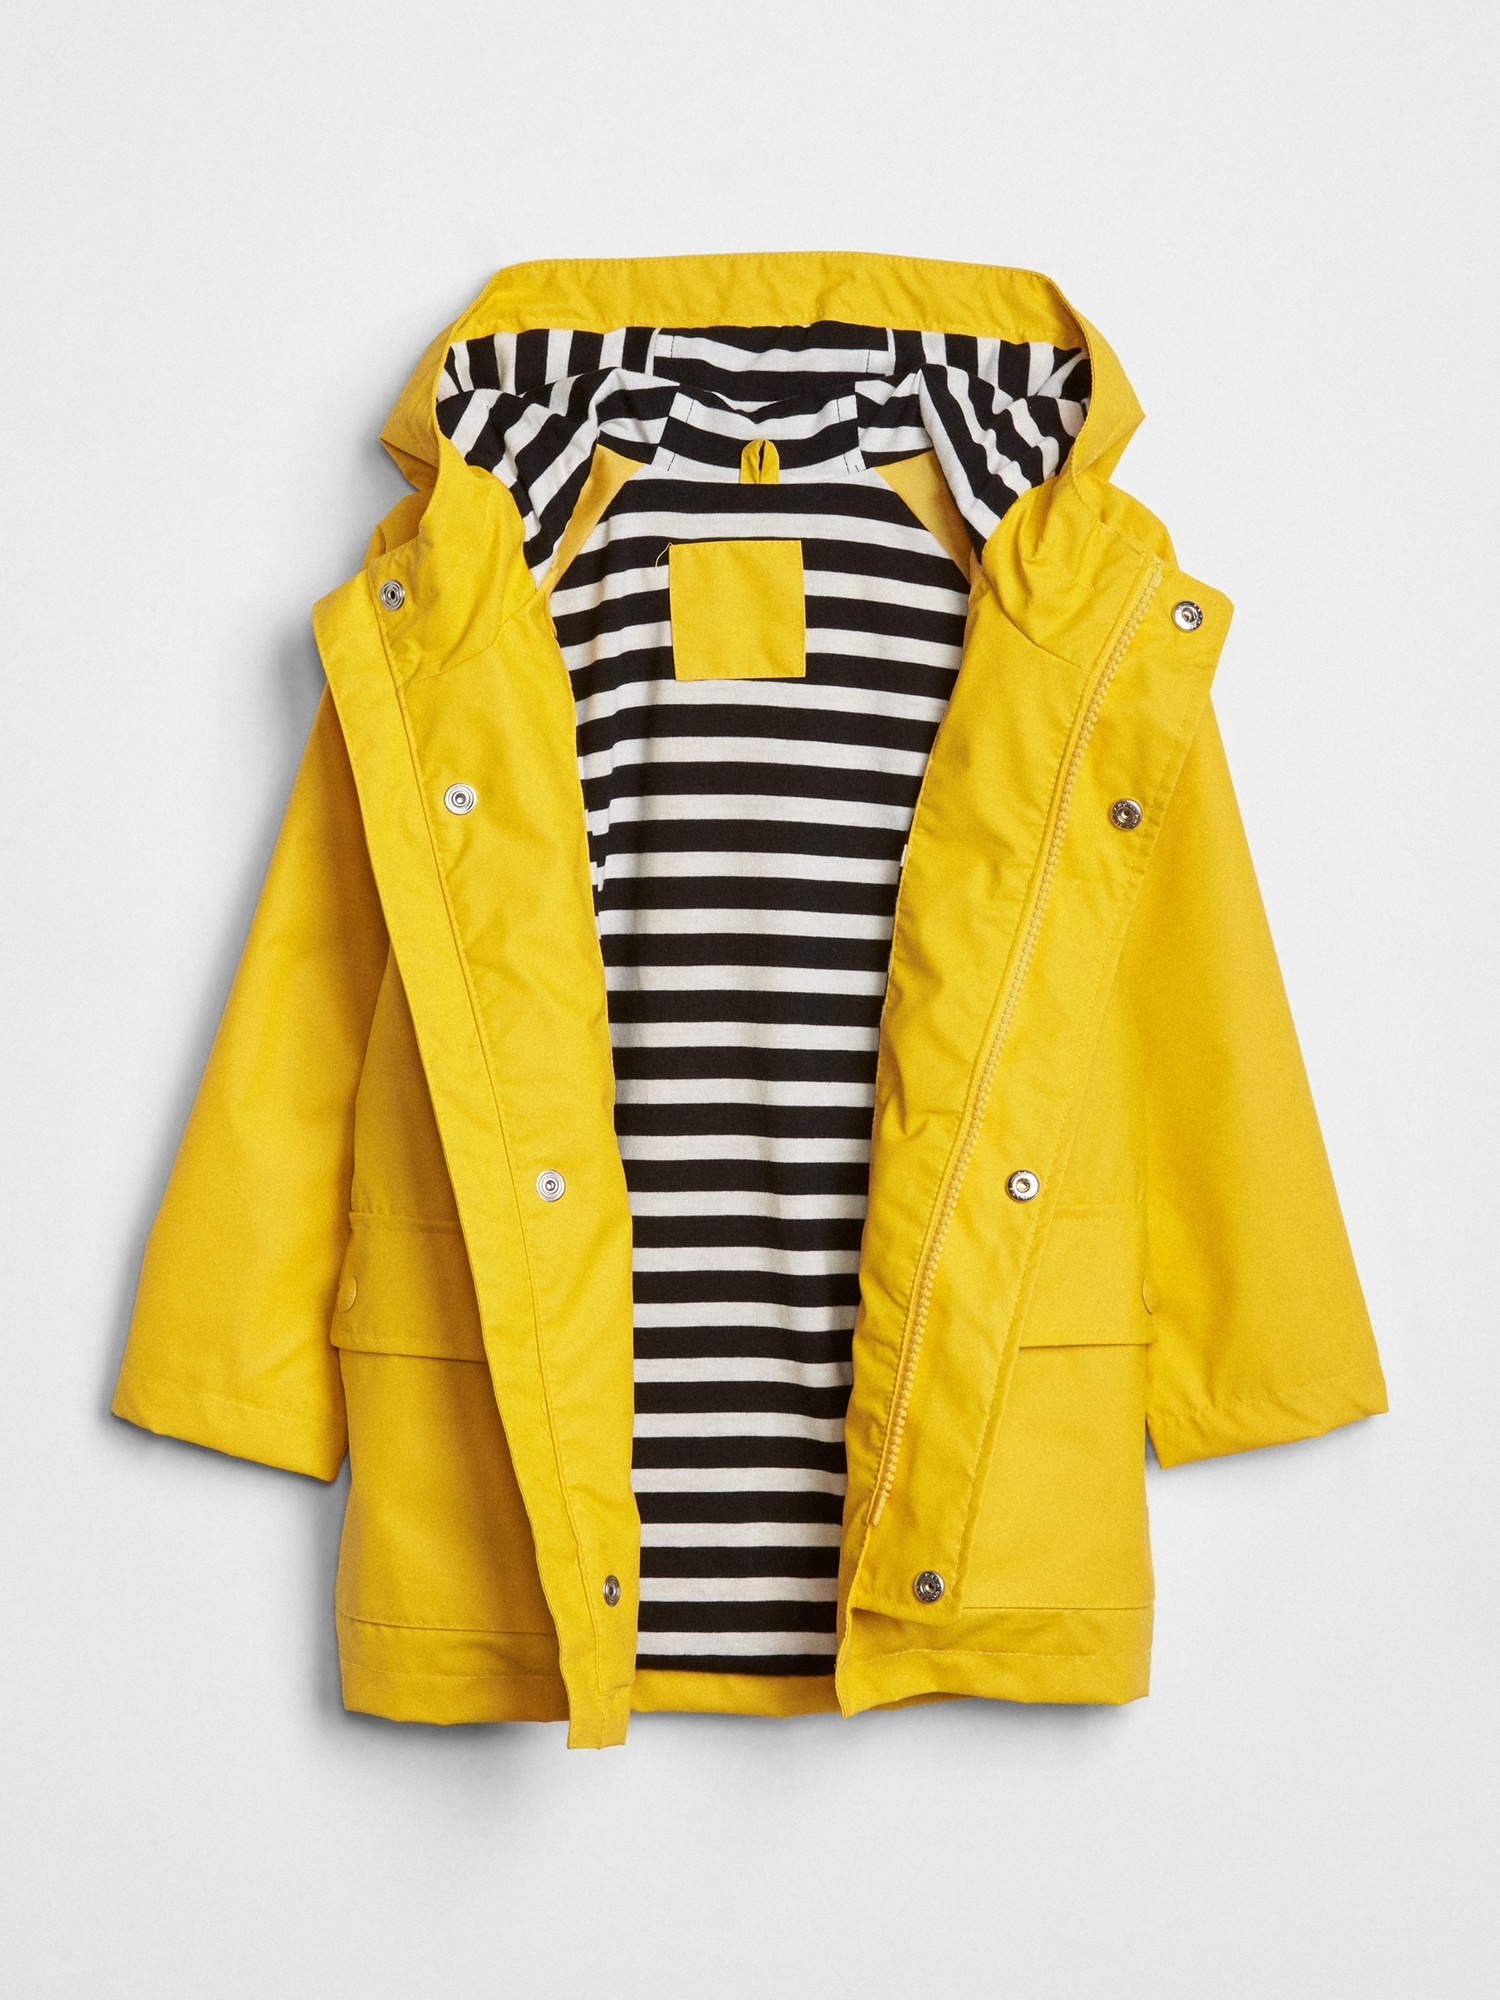 Childs Yellow Raincoat | vlr.eng.br